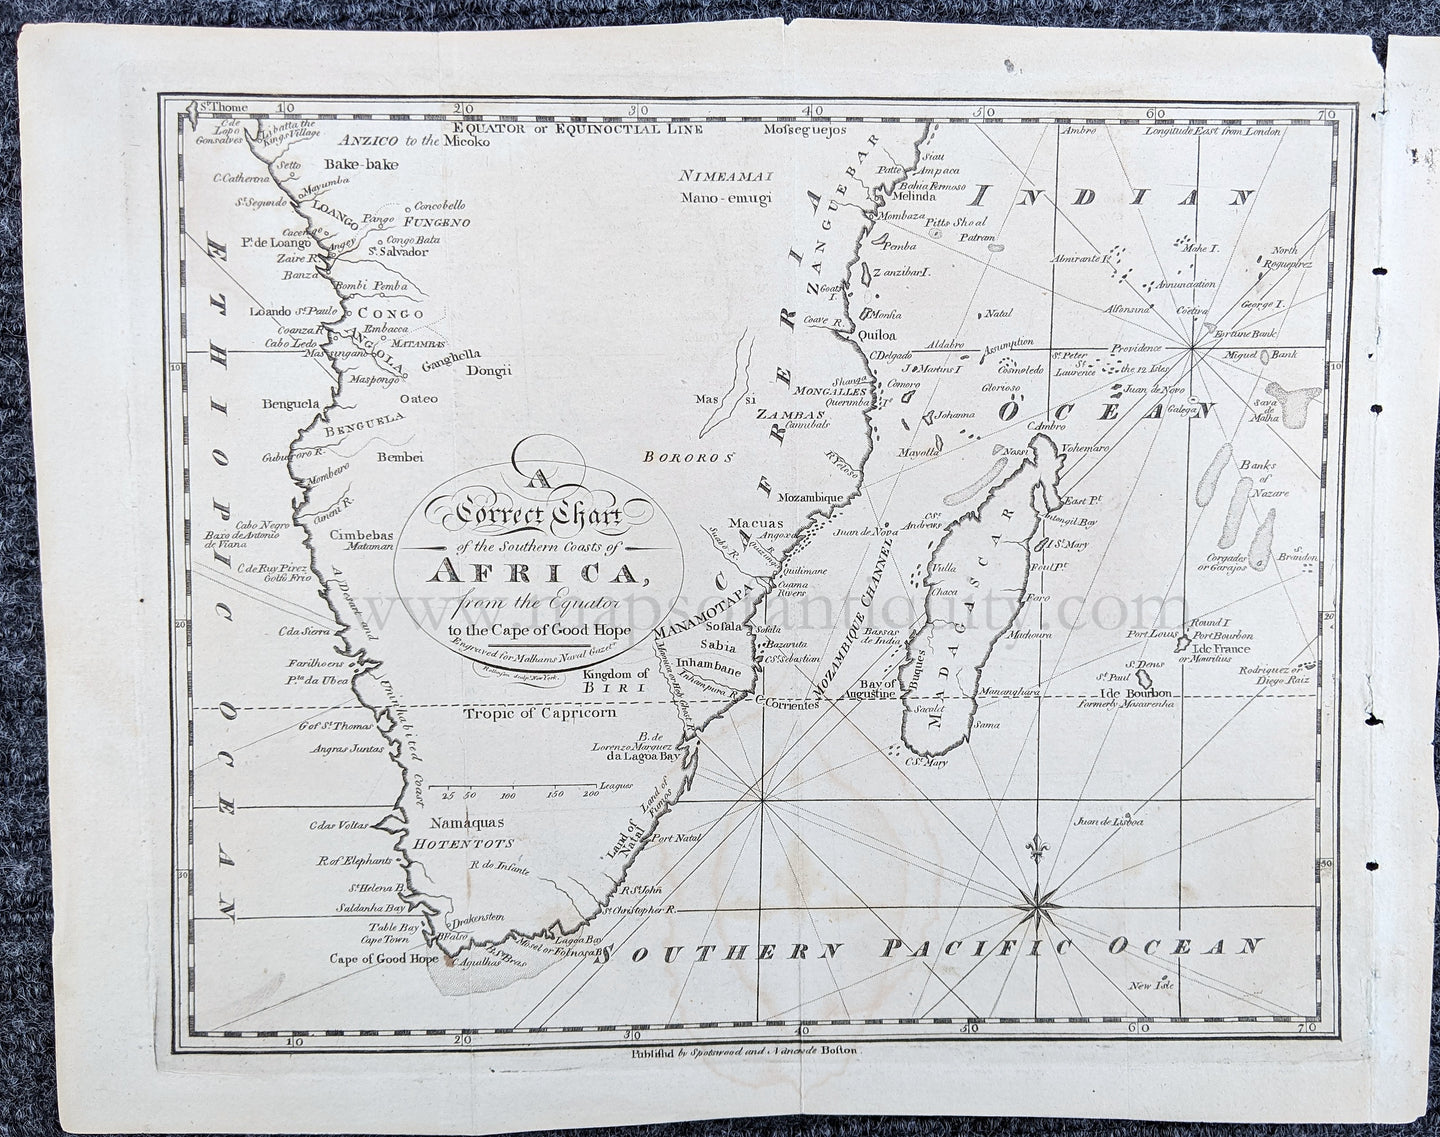 Genuine-Antique-Map-A-Correct-Chart-of-the-Southern-Coasts-of-Africa-from-the-Equator-to-the-Cape-of-Good-Hope-Africa--1796-Malham-Maps-Of-Antiquity-1800s-19th-century